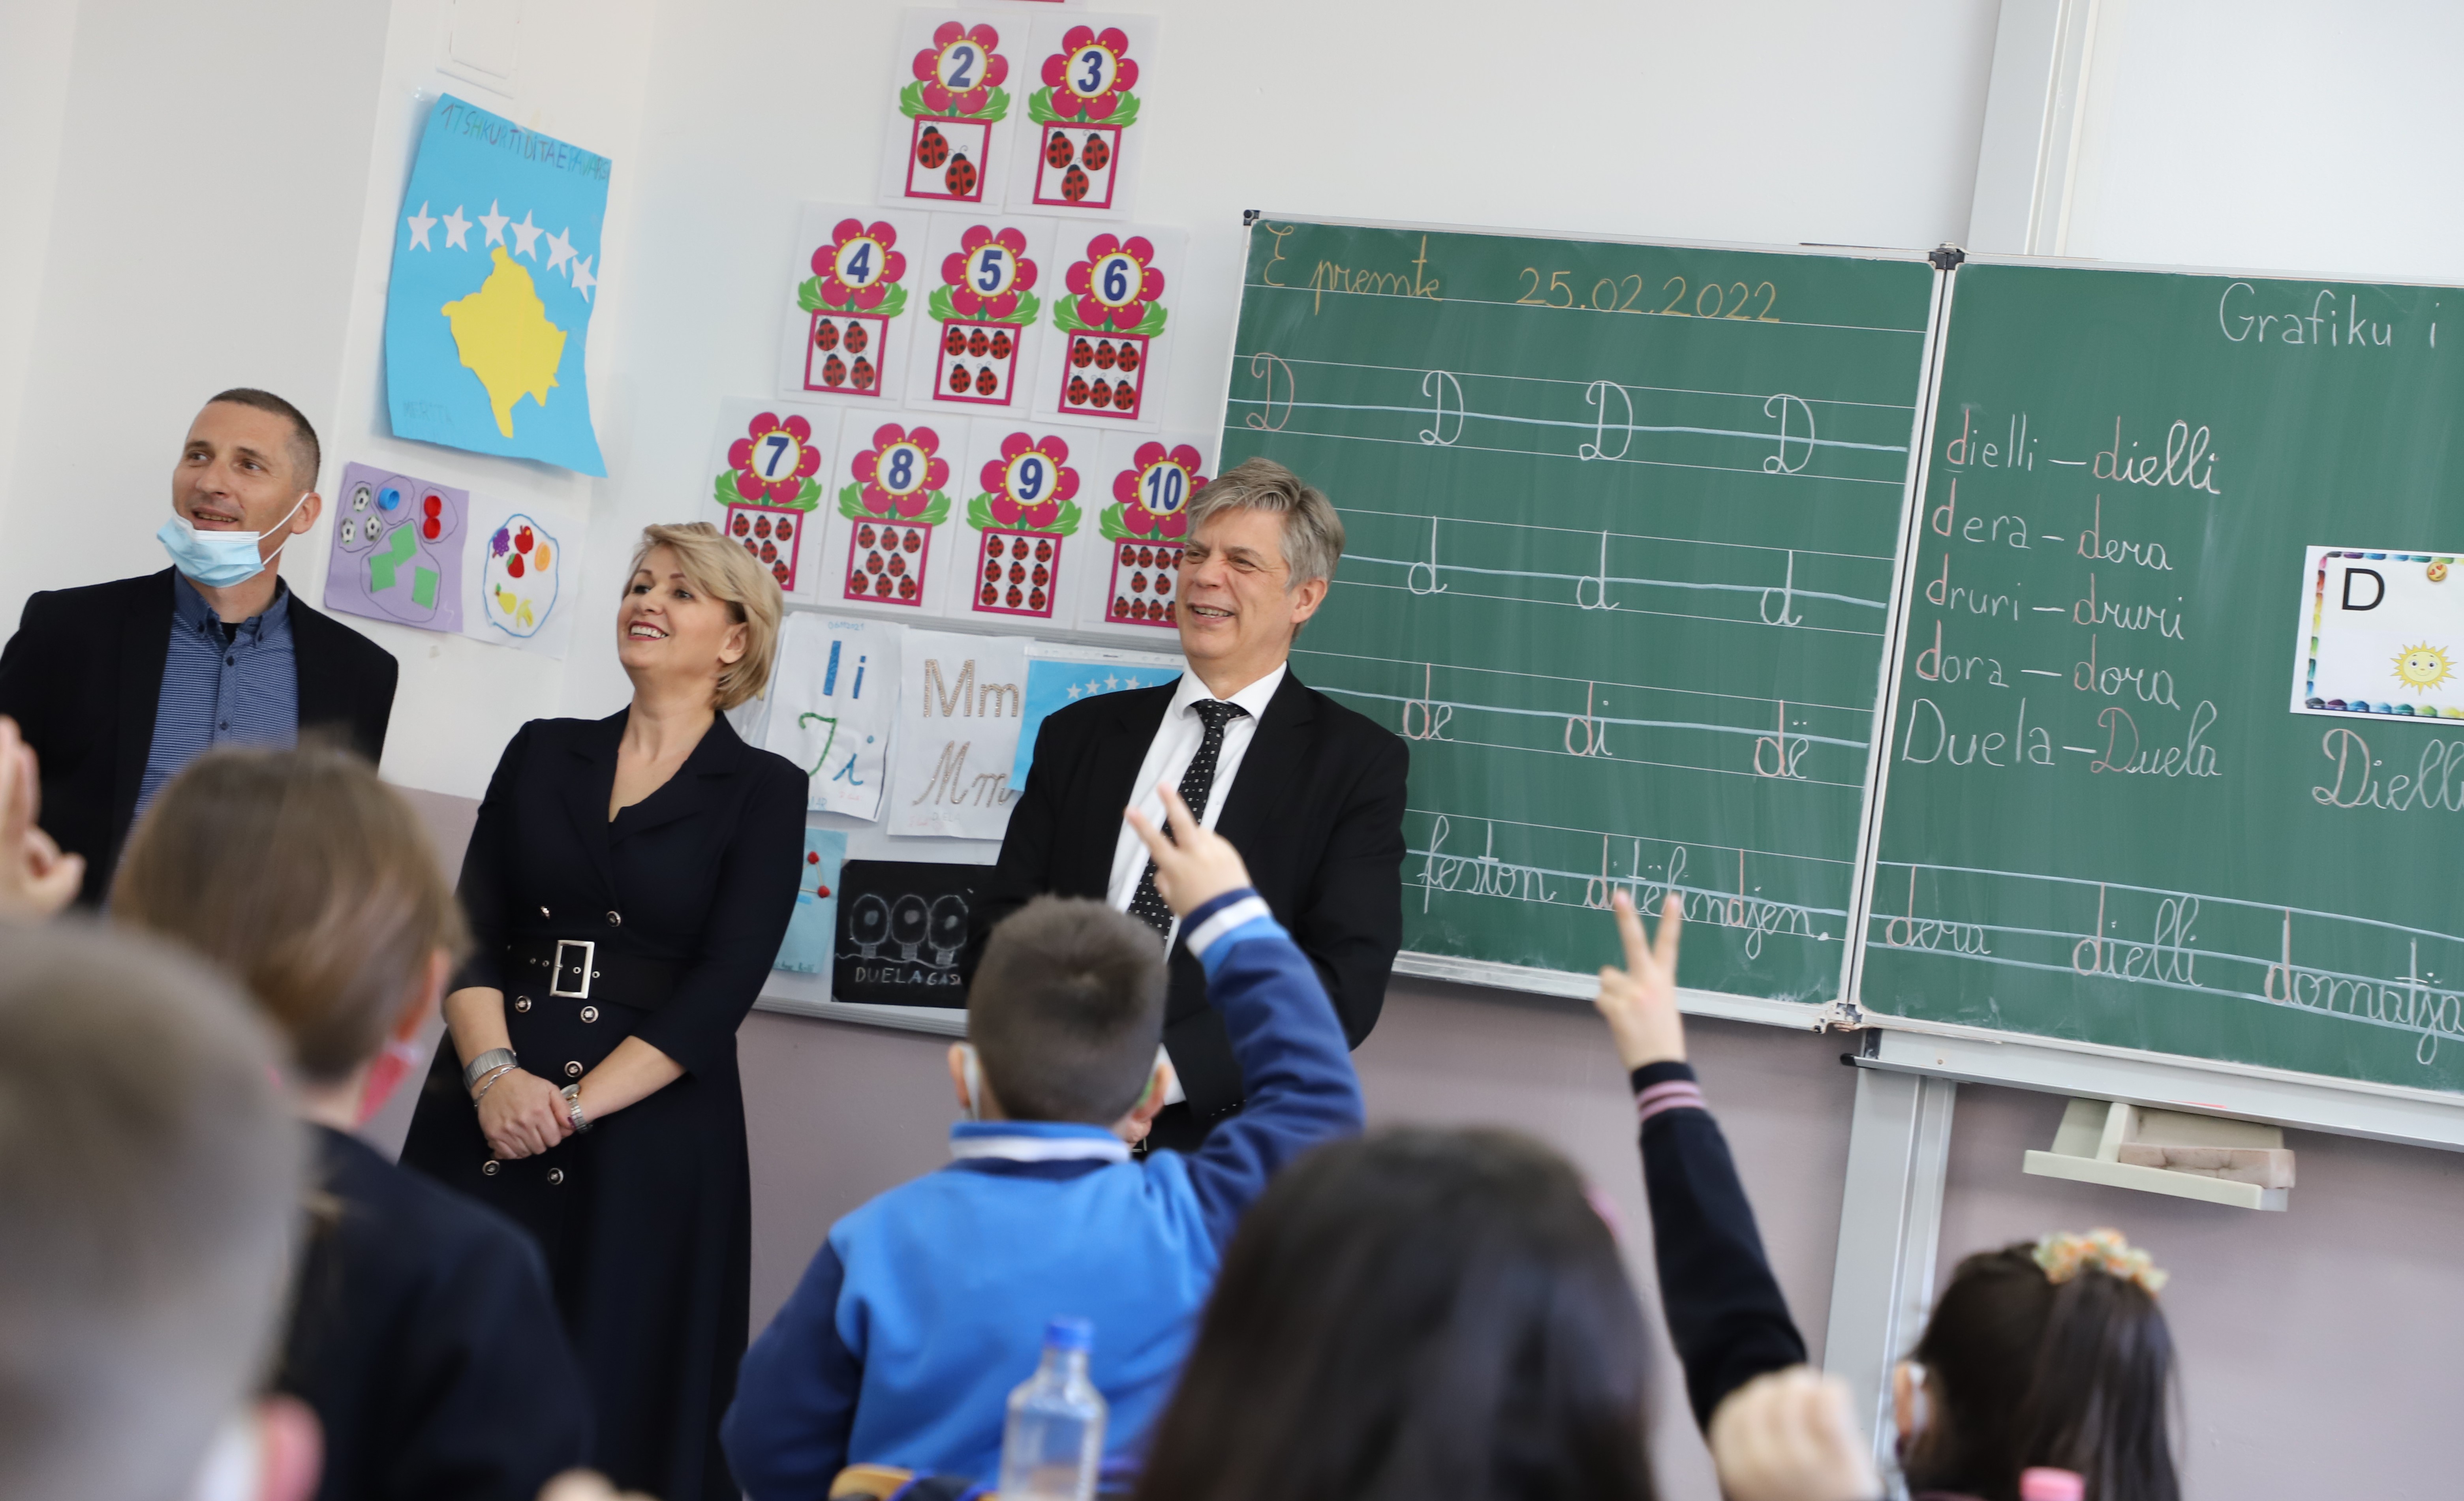 EULEX supports students and local education institutions through donations in Pristina, Gjilan/Gnjilane and Šilovo/Shillovë